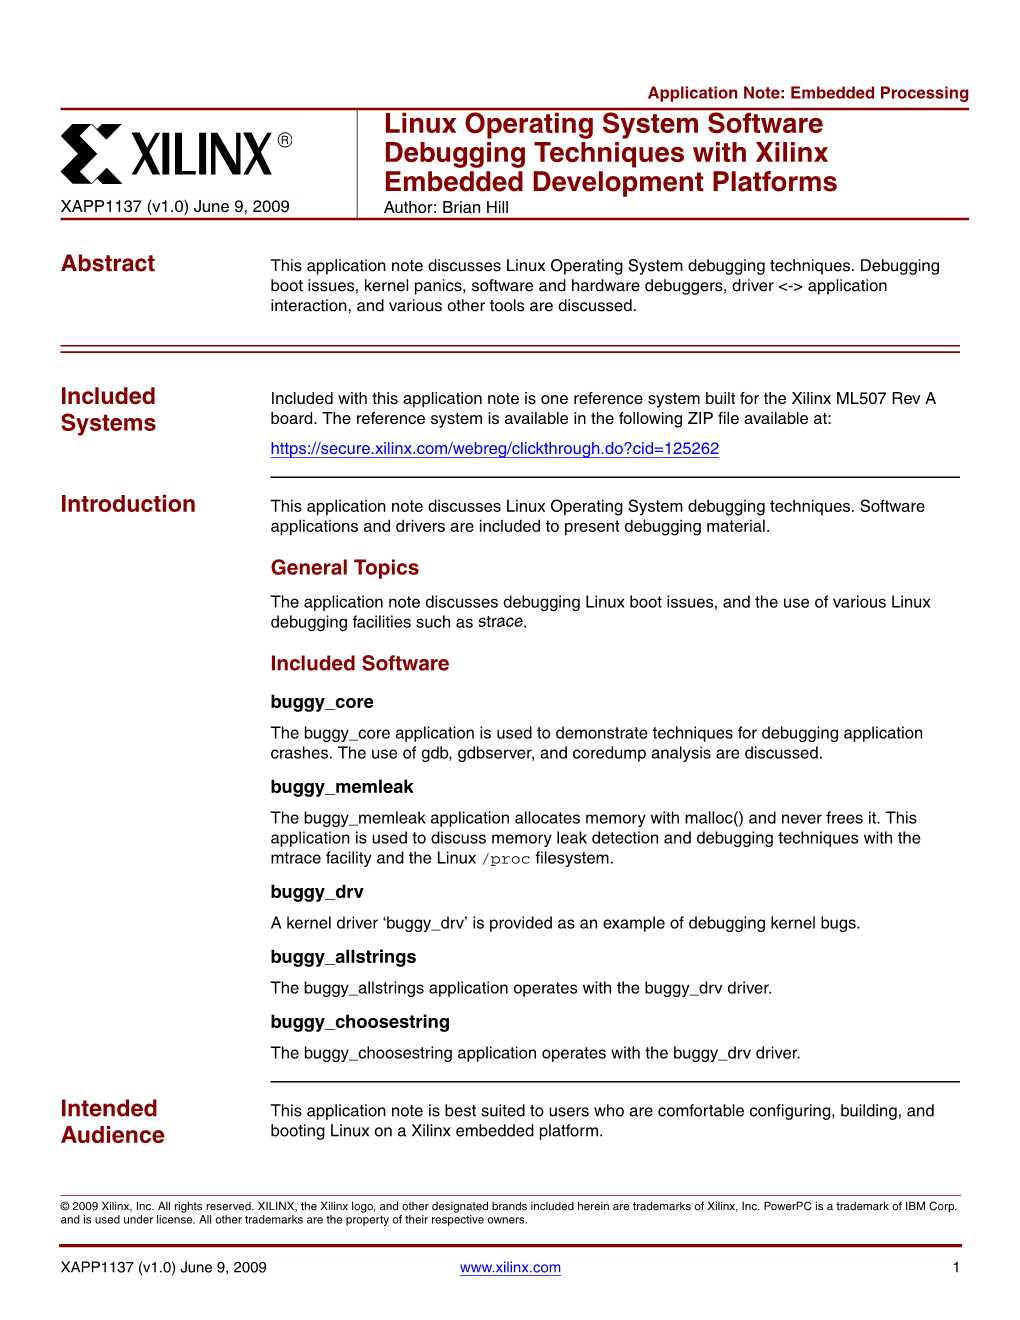 Xilinx XAPP1137 Linux Operating System Software Debugging